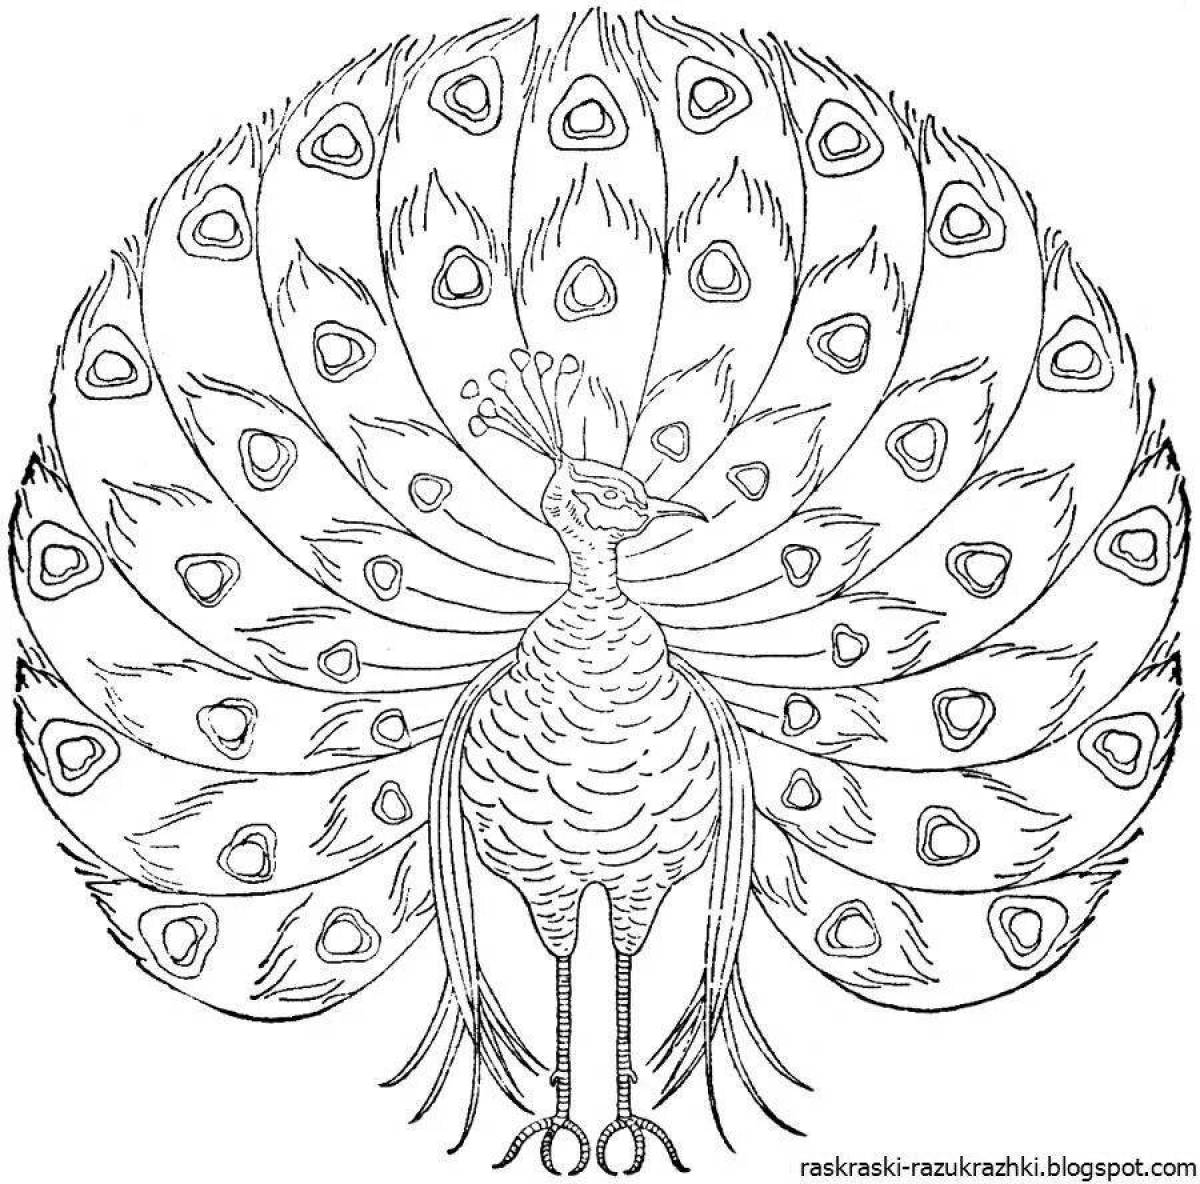 Adorable peacock feathers coloring pages for kids